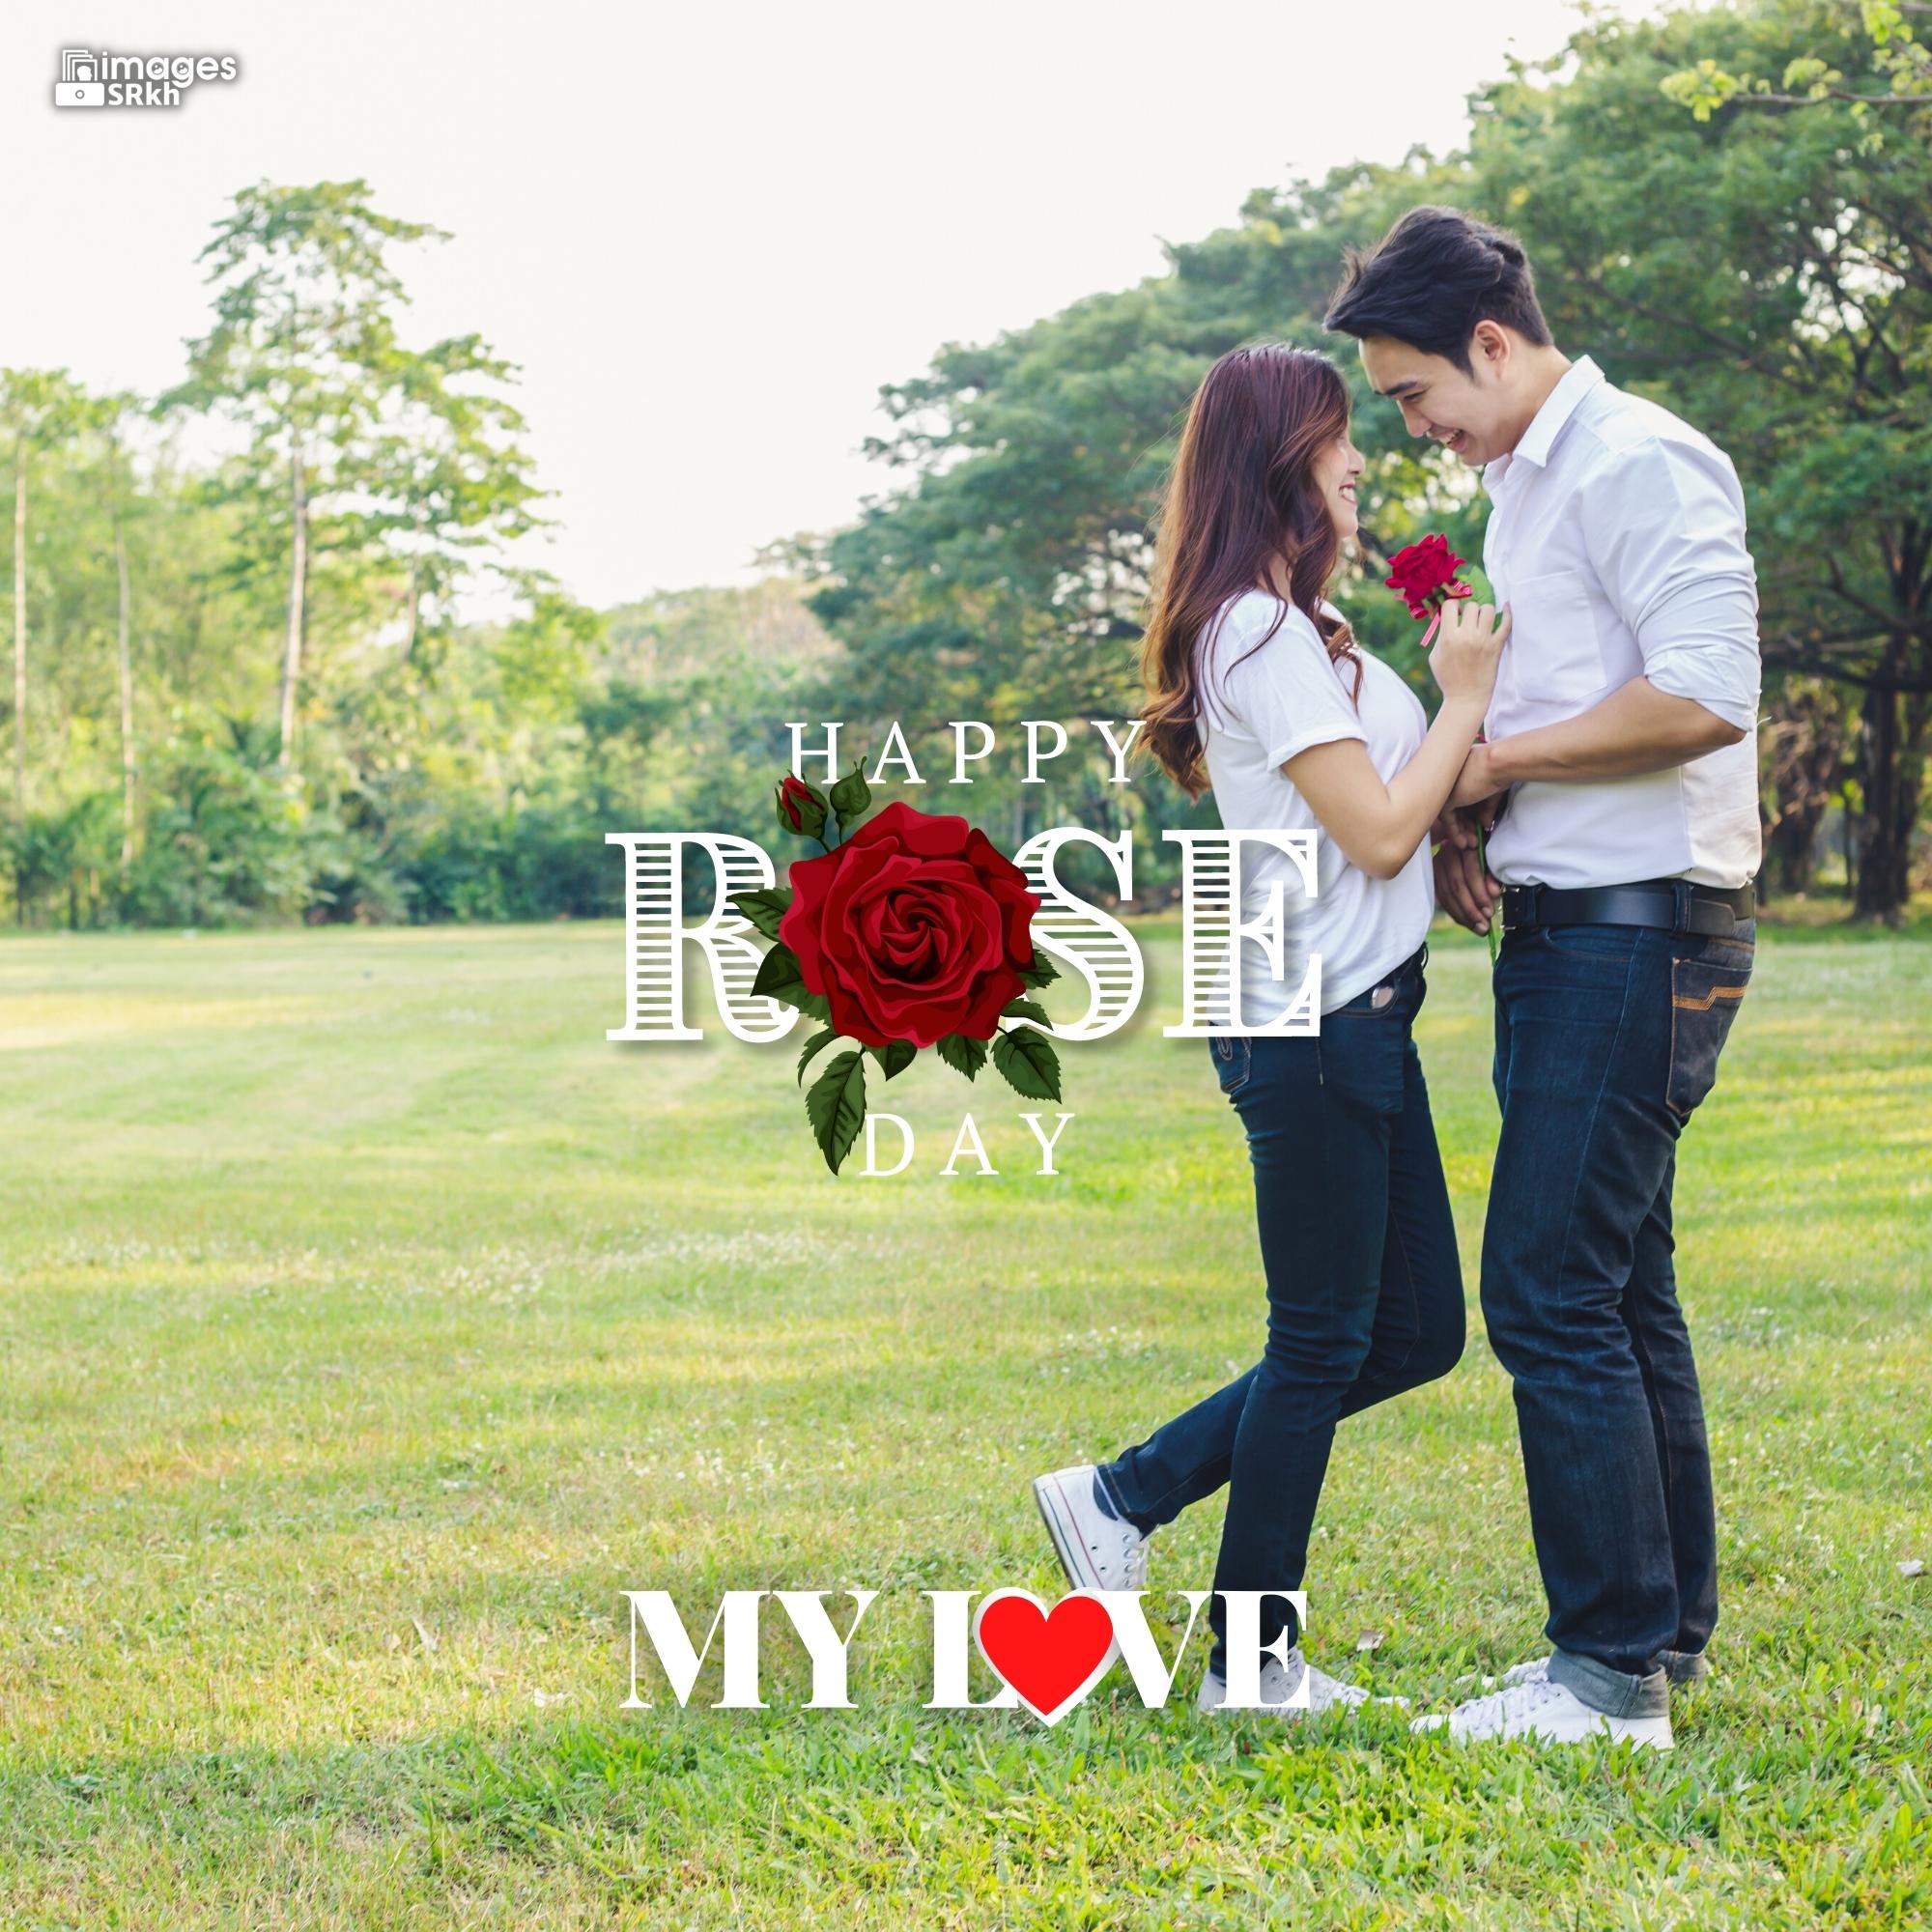 Happy Rose Day My Love (36) | HD IMAGES